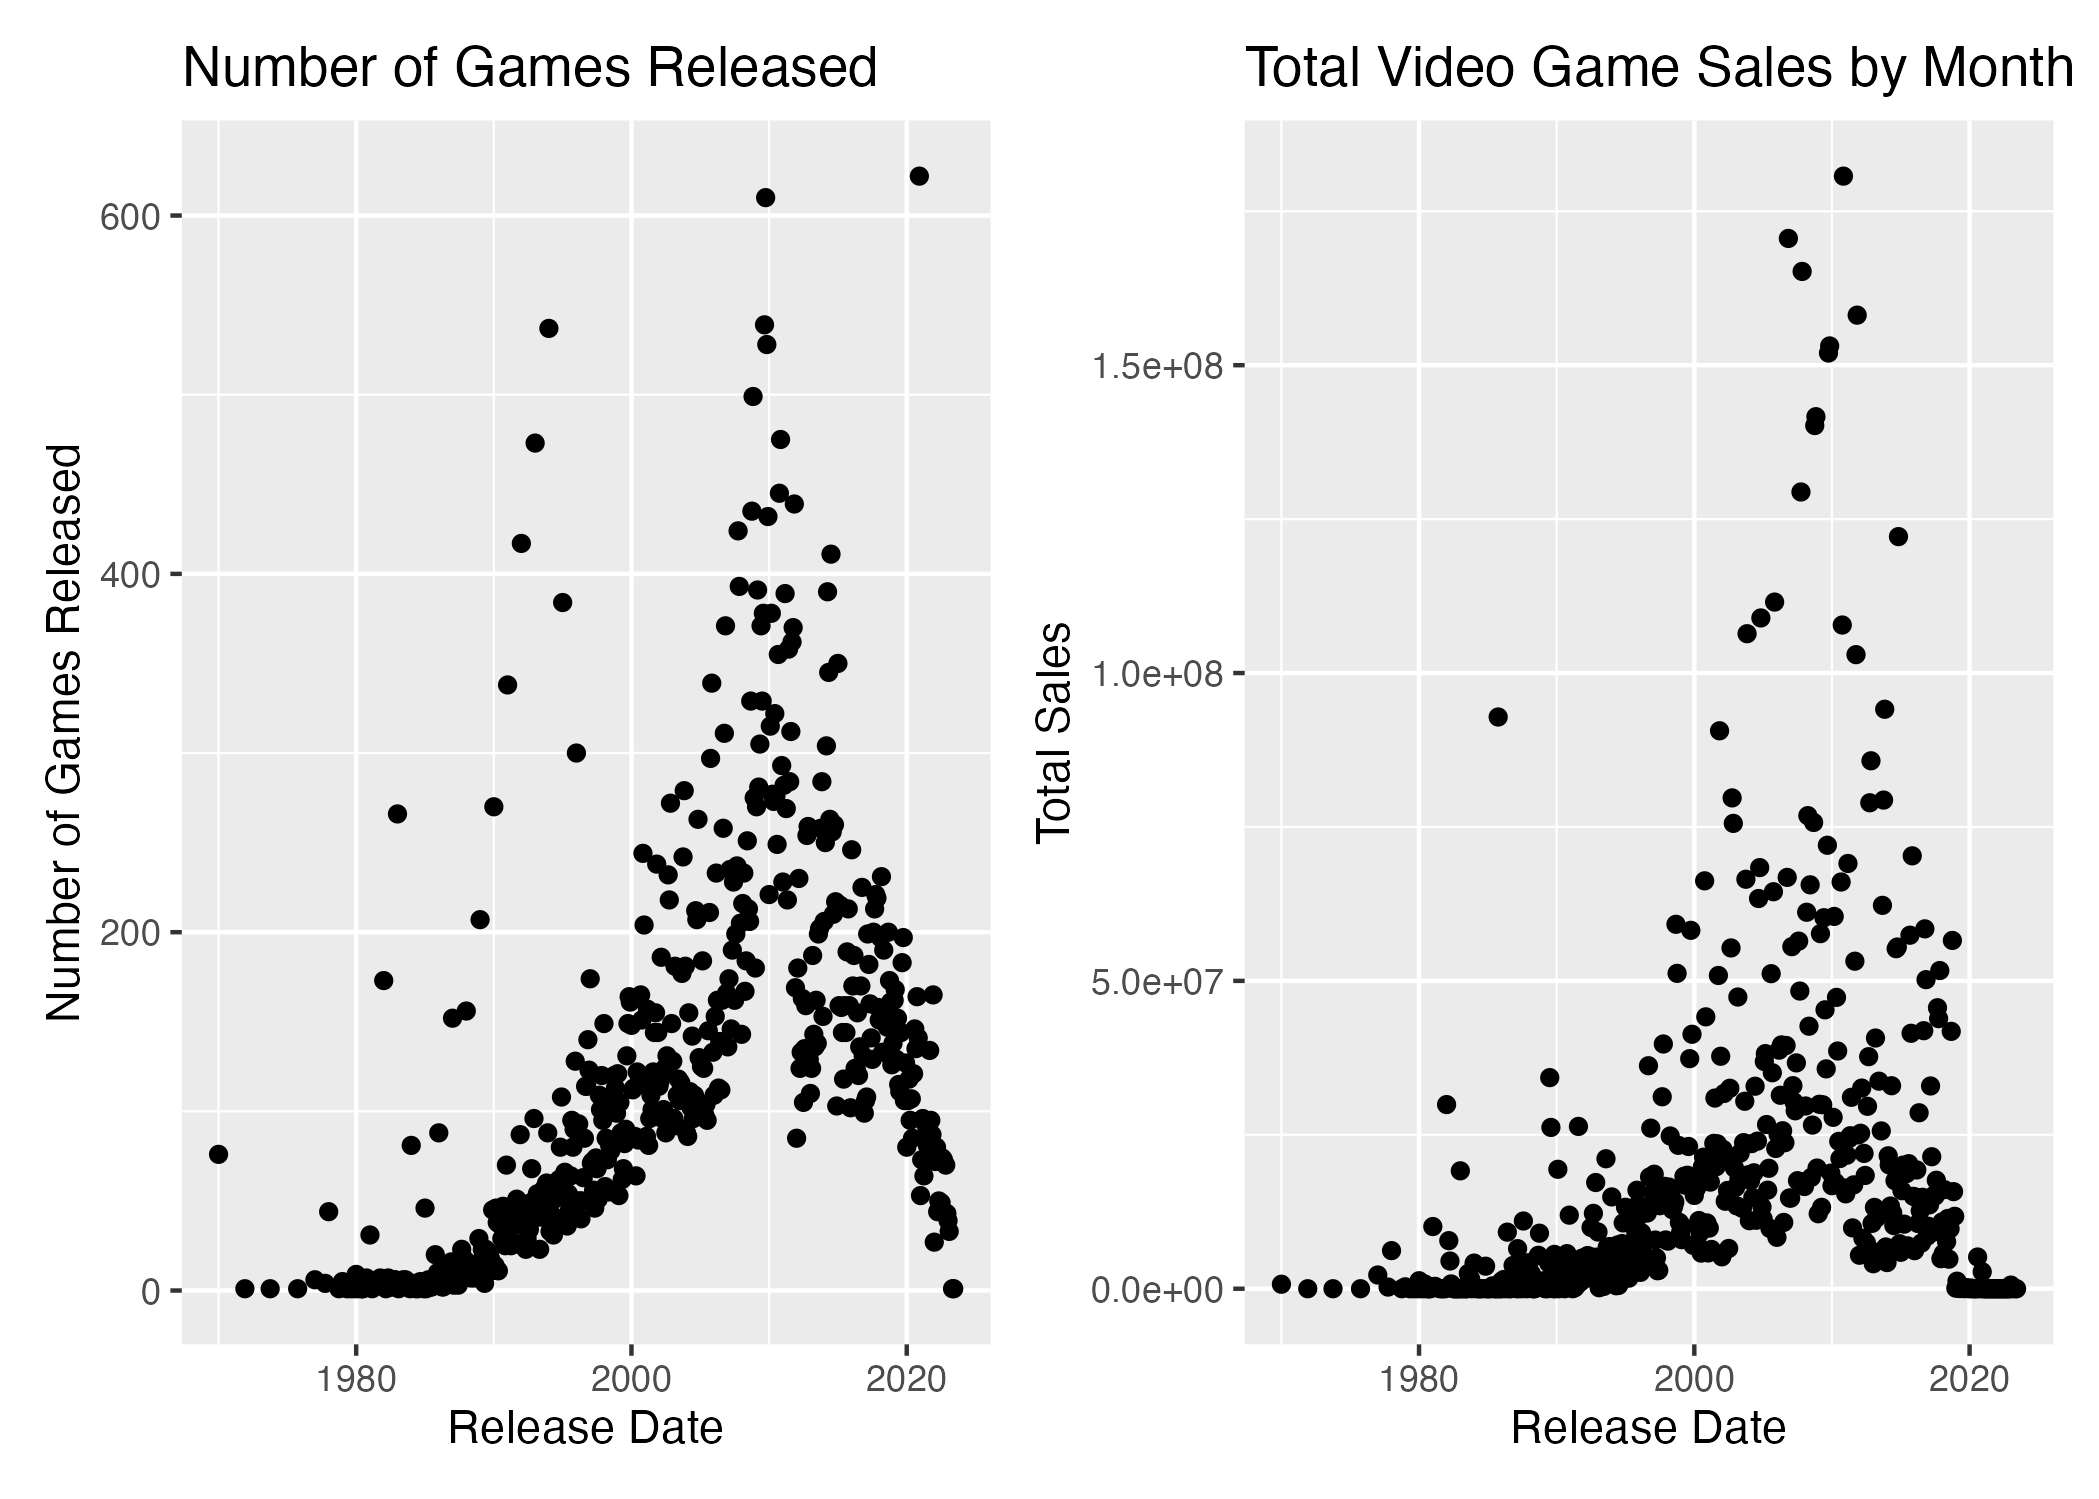 number of games released and total sales by month